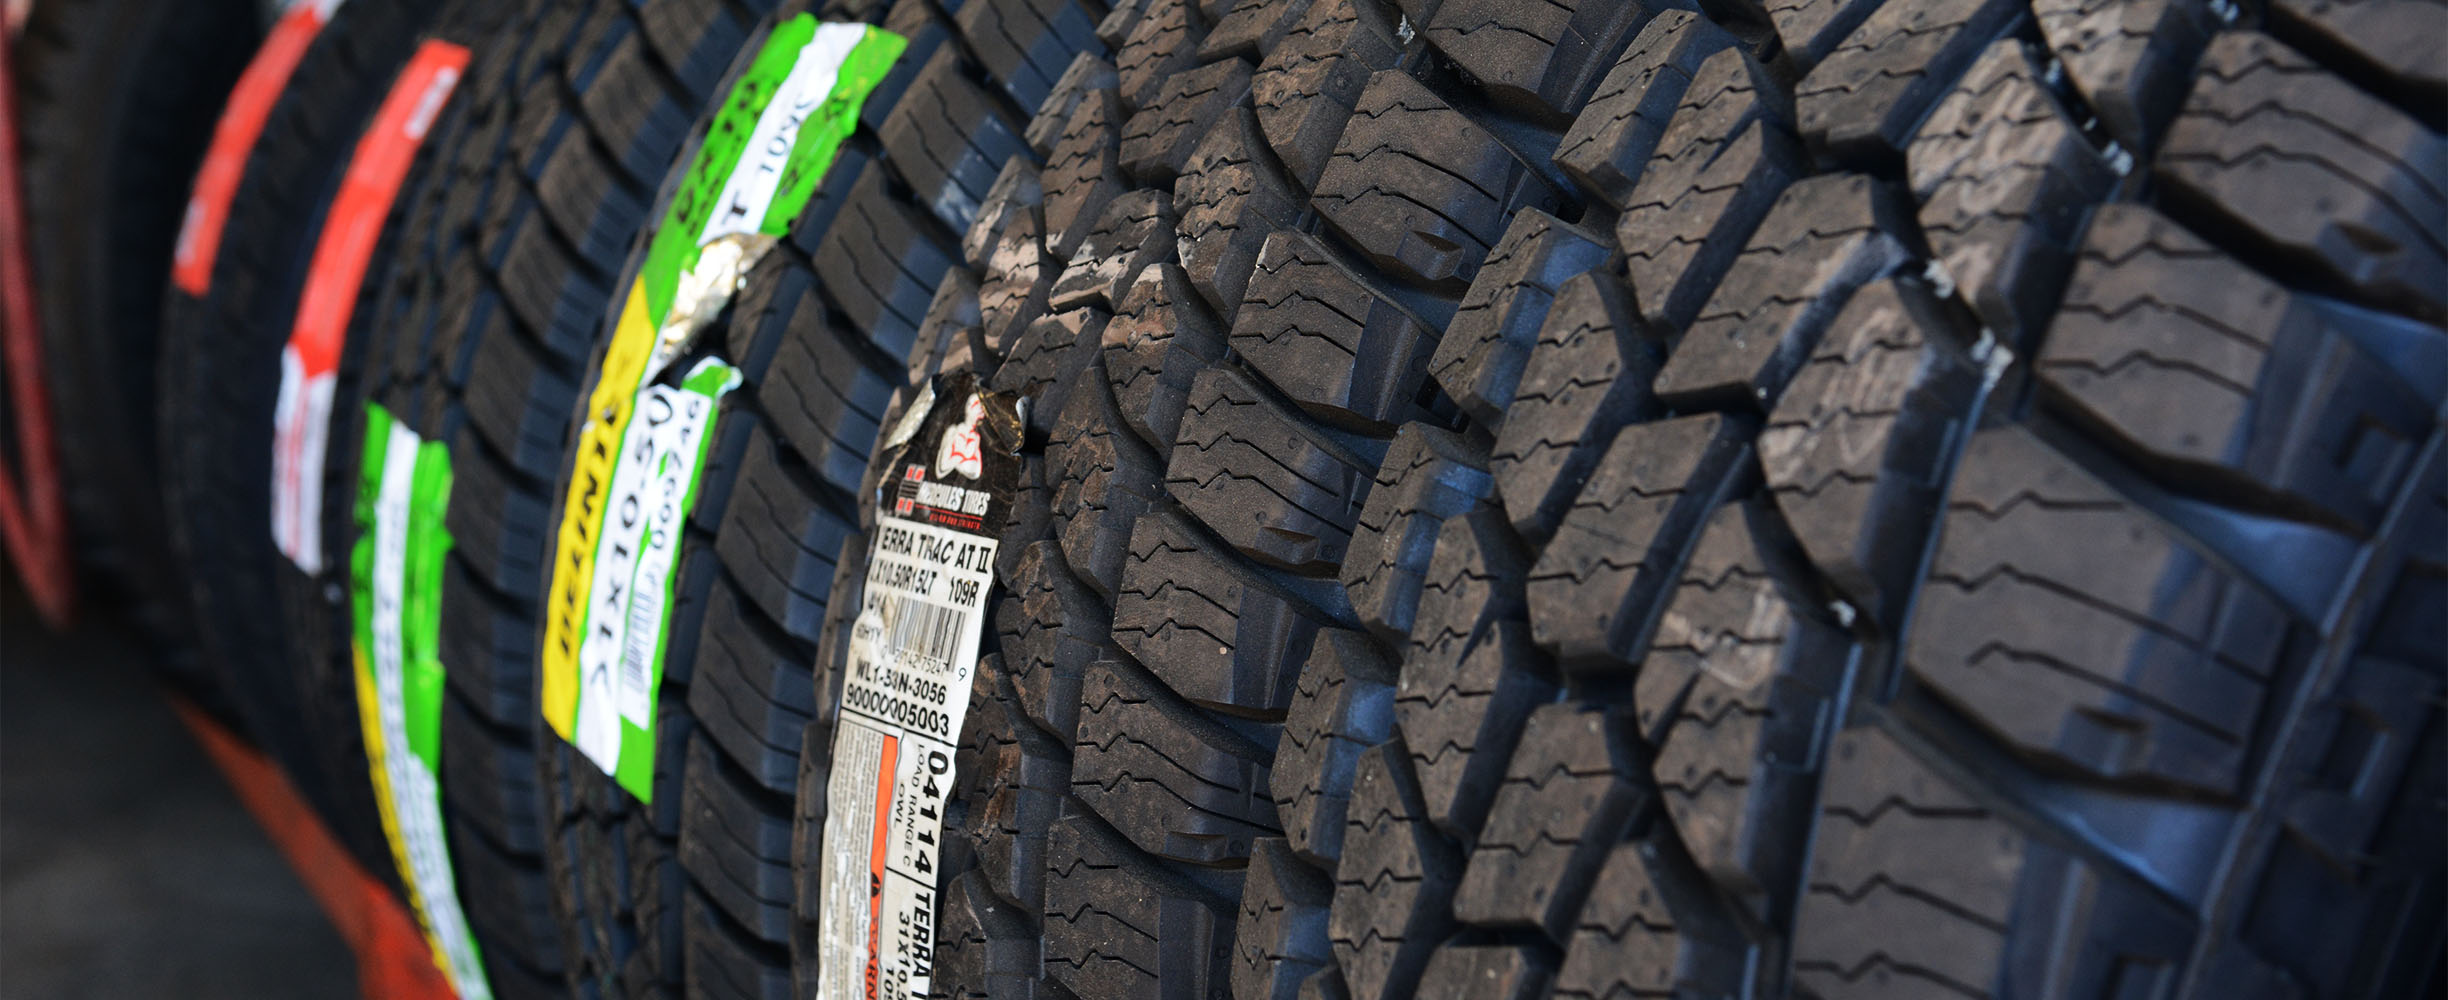 Best new tires at a low price.